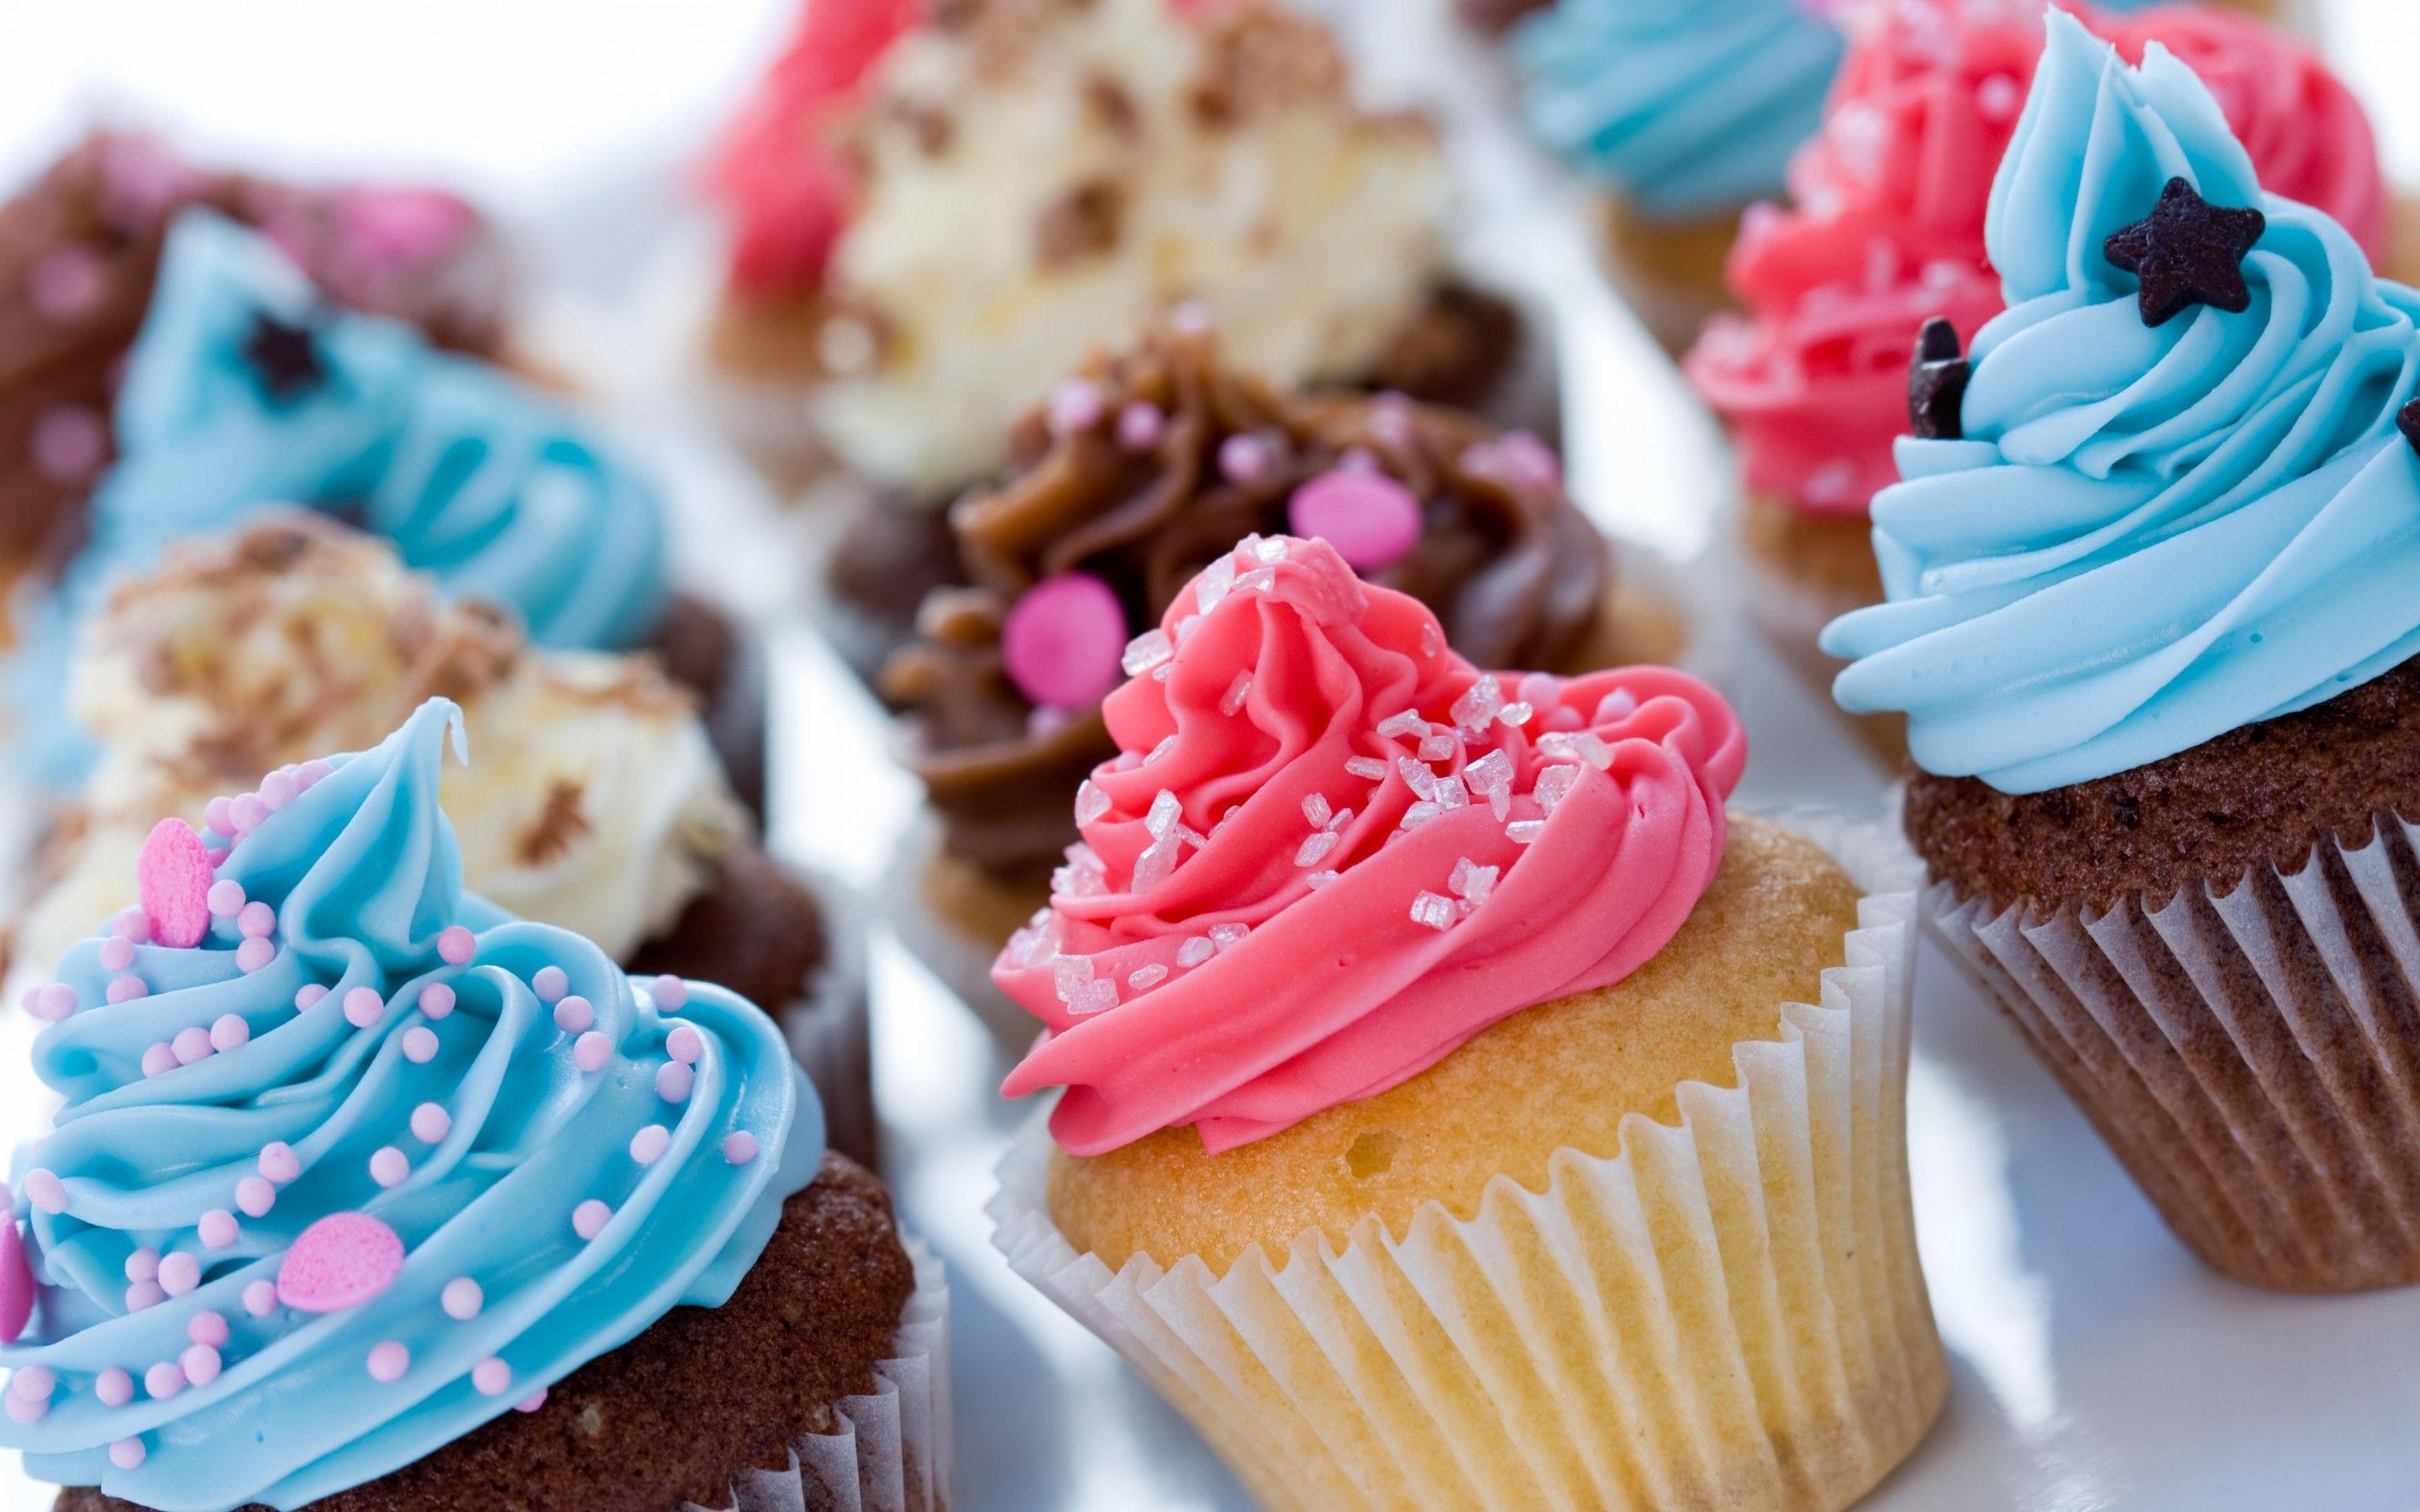 Other Wallpaper: Cupcake Wallpaper High Quality Resolution